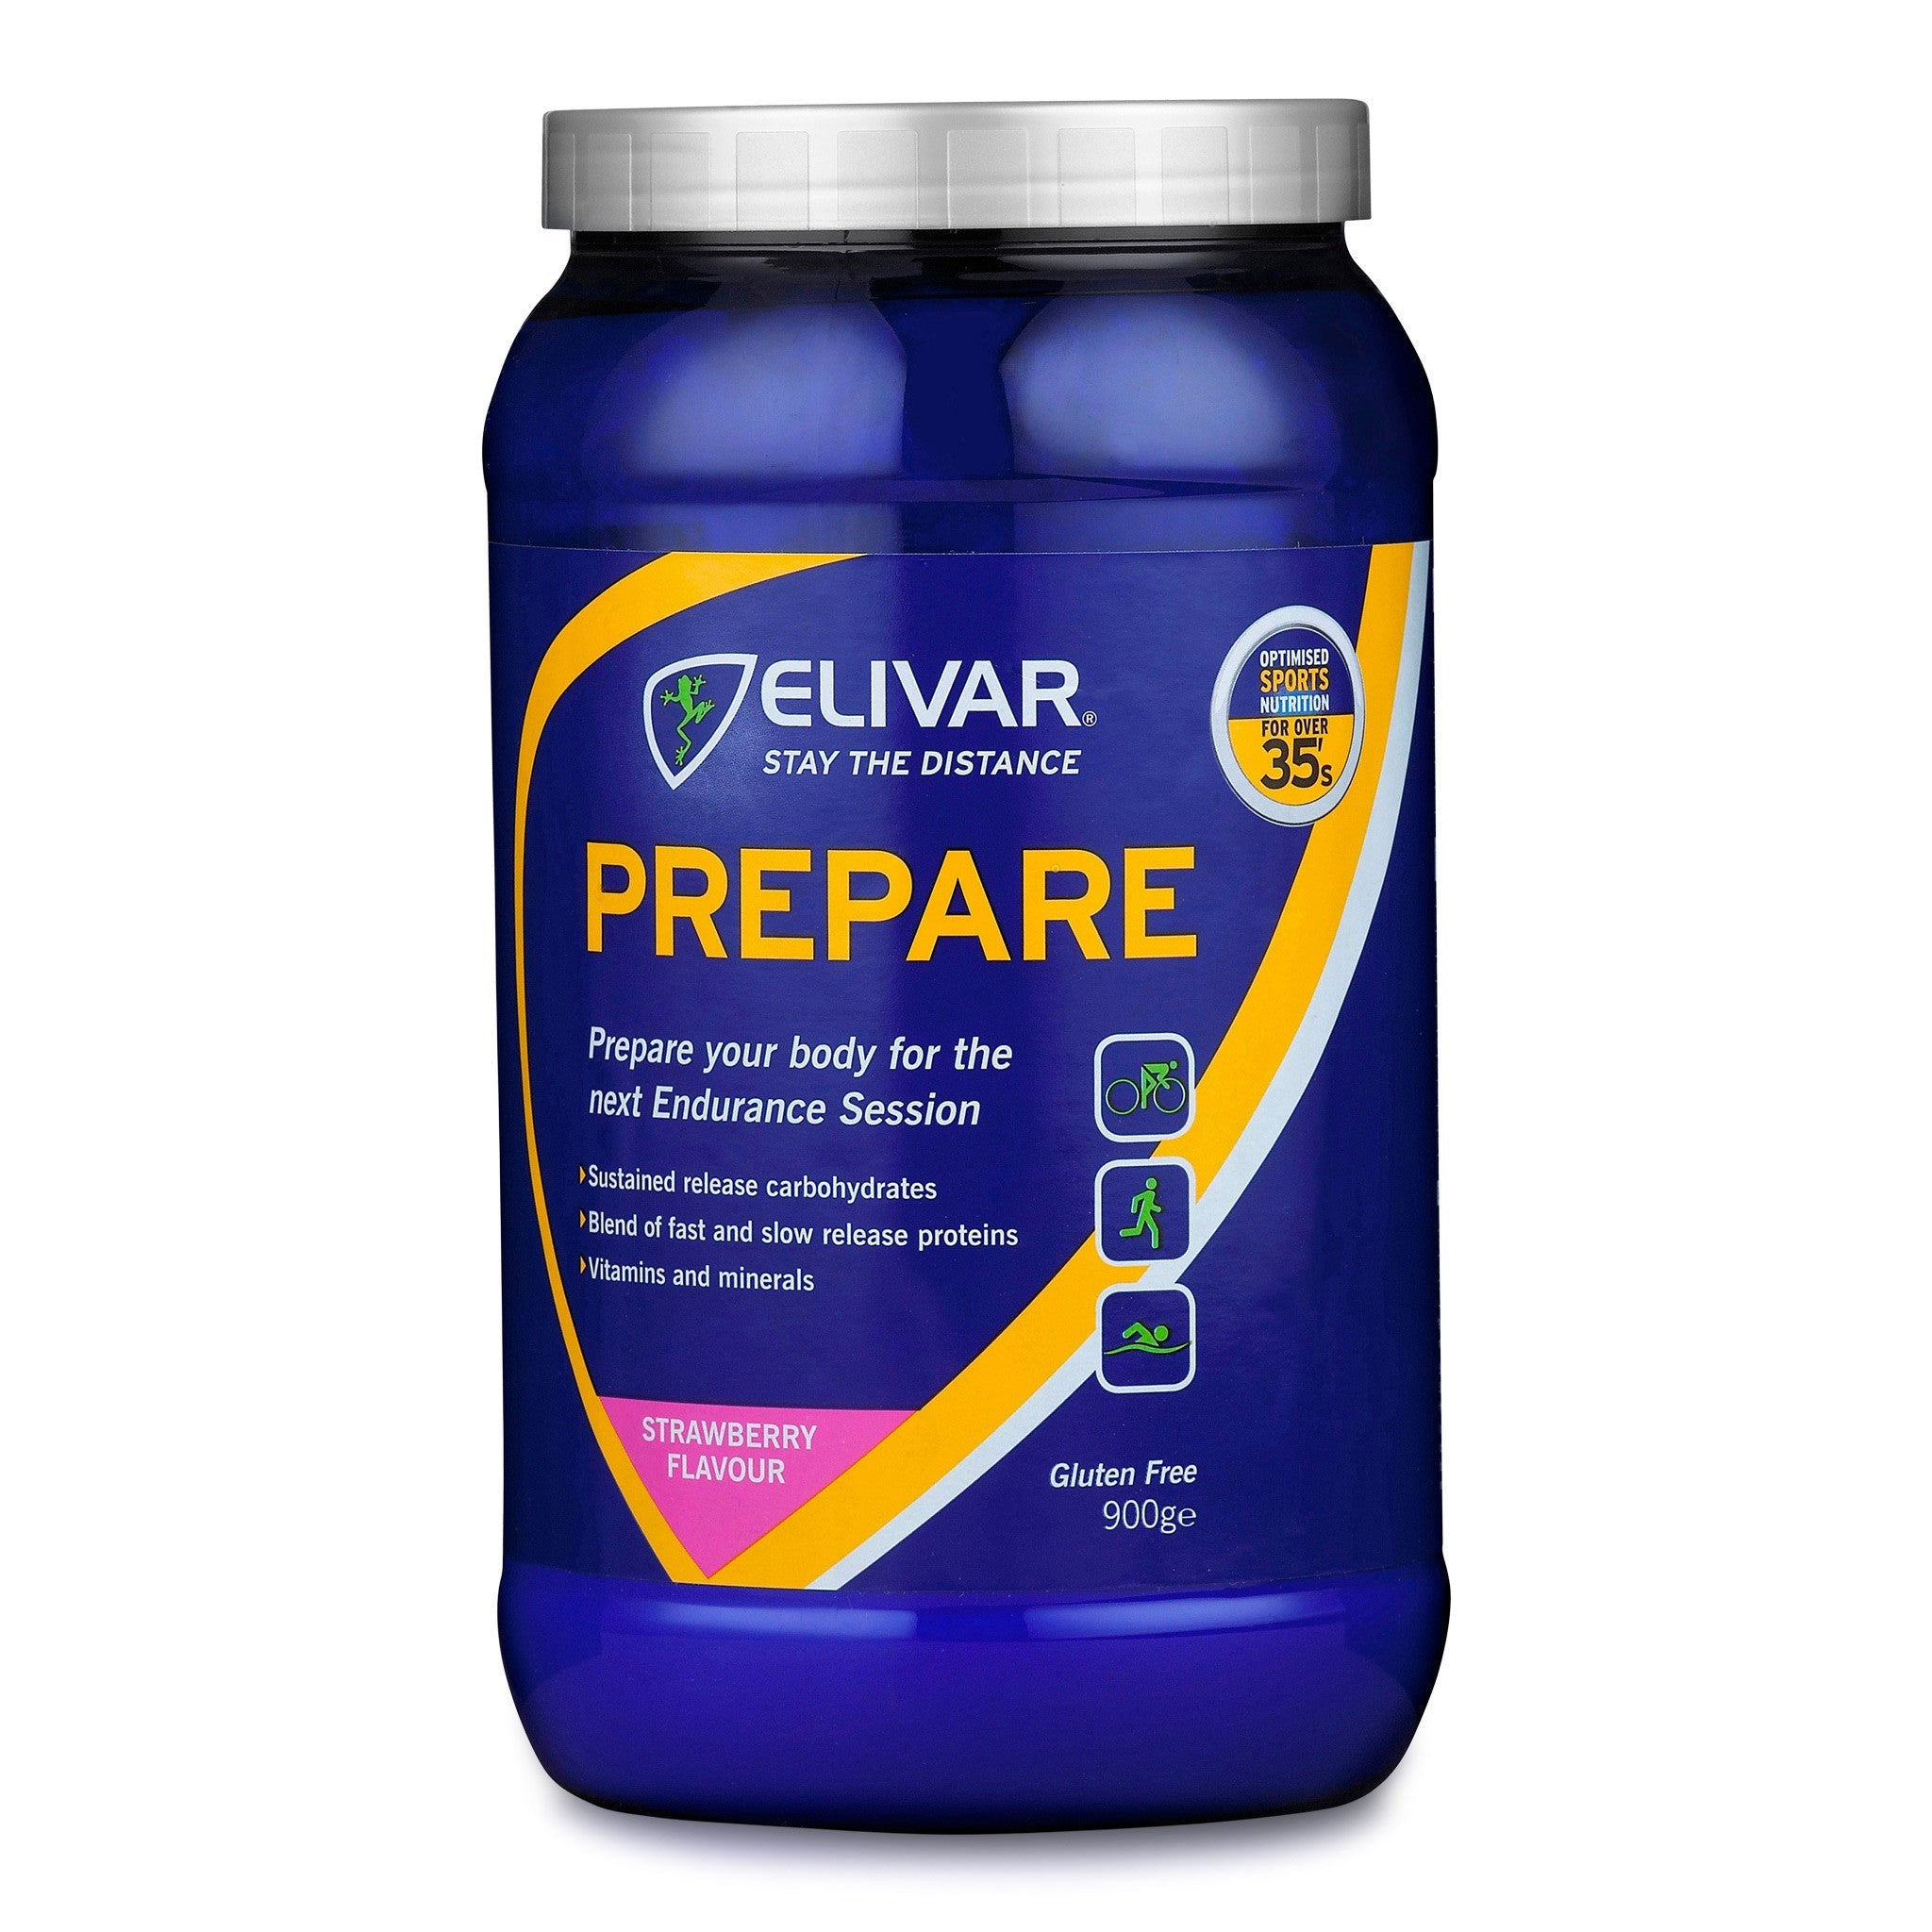 Prepare - Pre-training Energy and Protein Drink Mix - 900g Tub - Strawberry Flavour